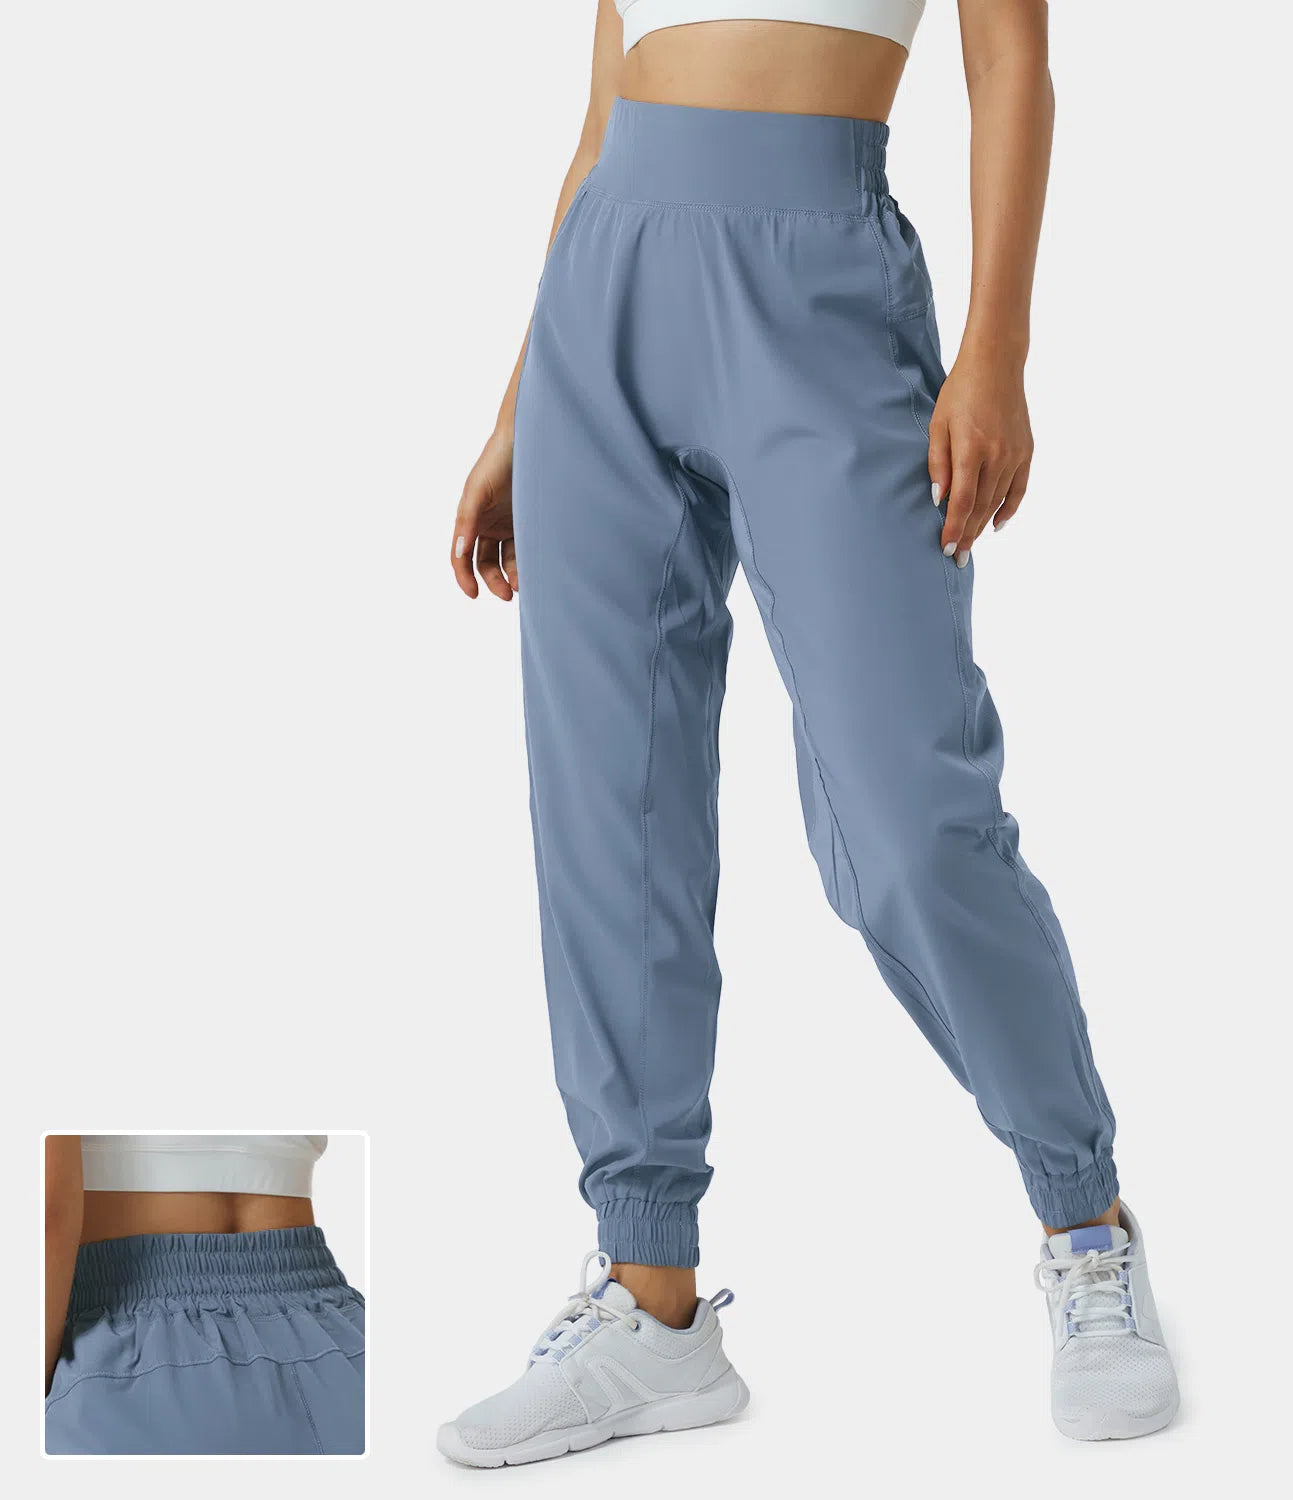 19 Petite Joggers For Women 5'3 And Under - Starting at $14 – topsfordays